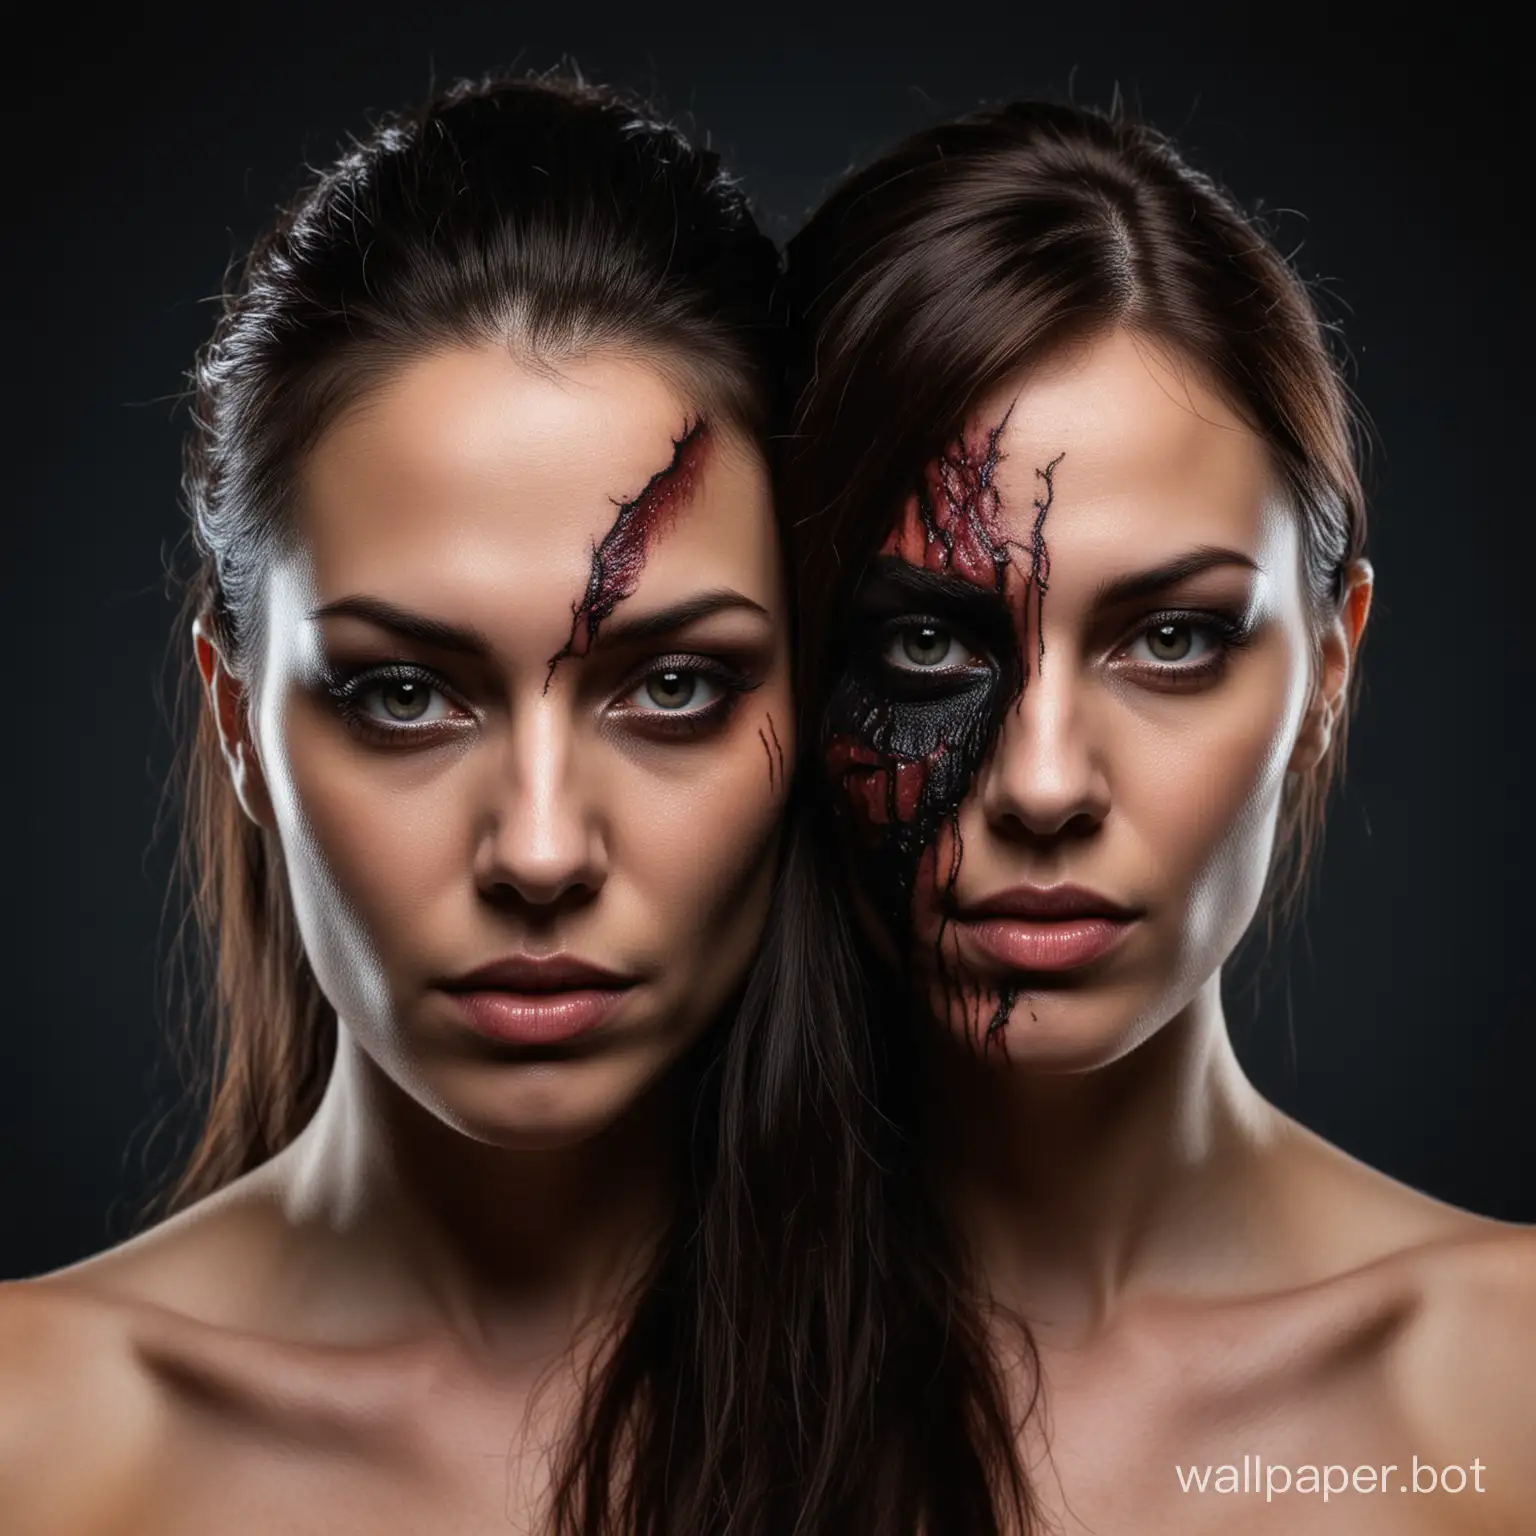 a beautiful woman with two faces: human and demonic. On a black background